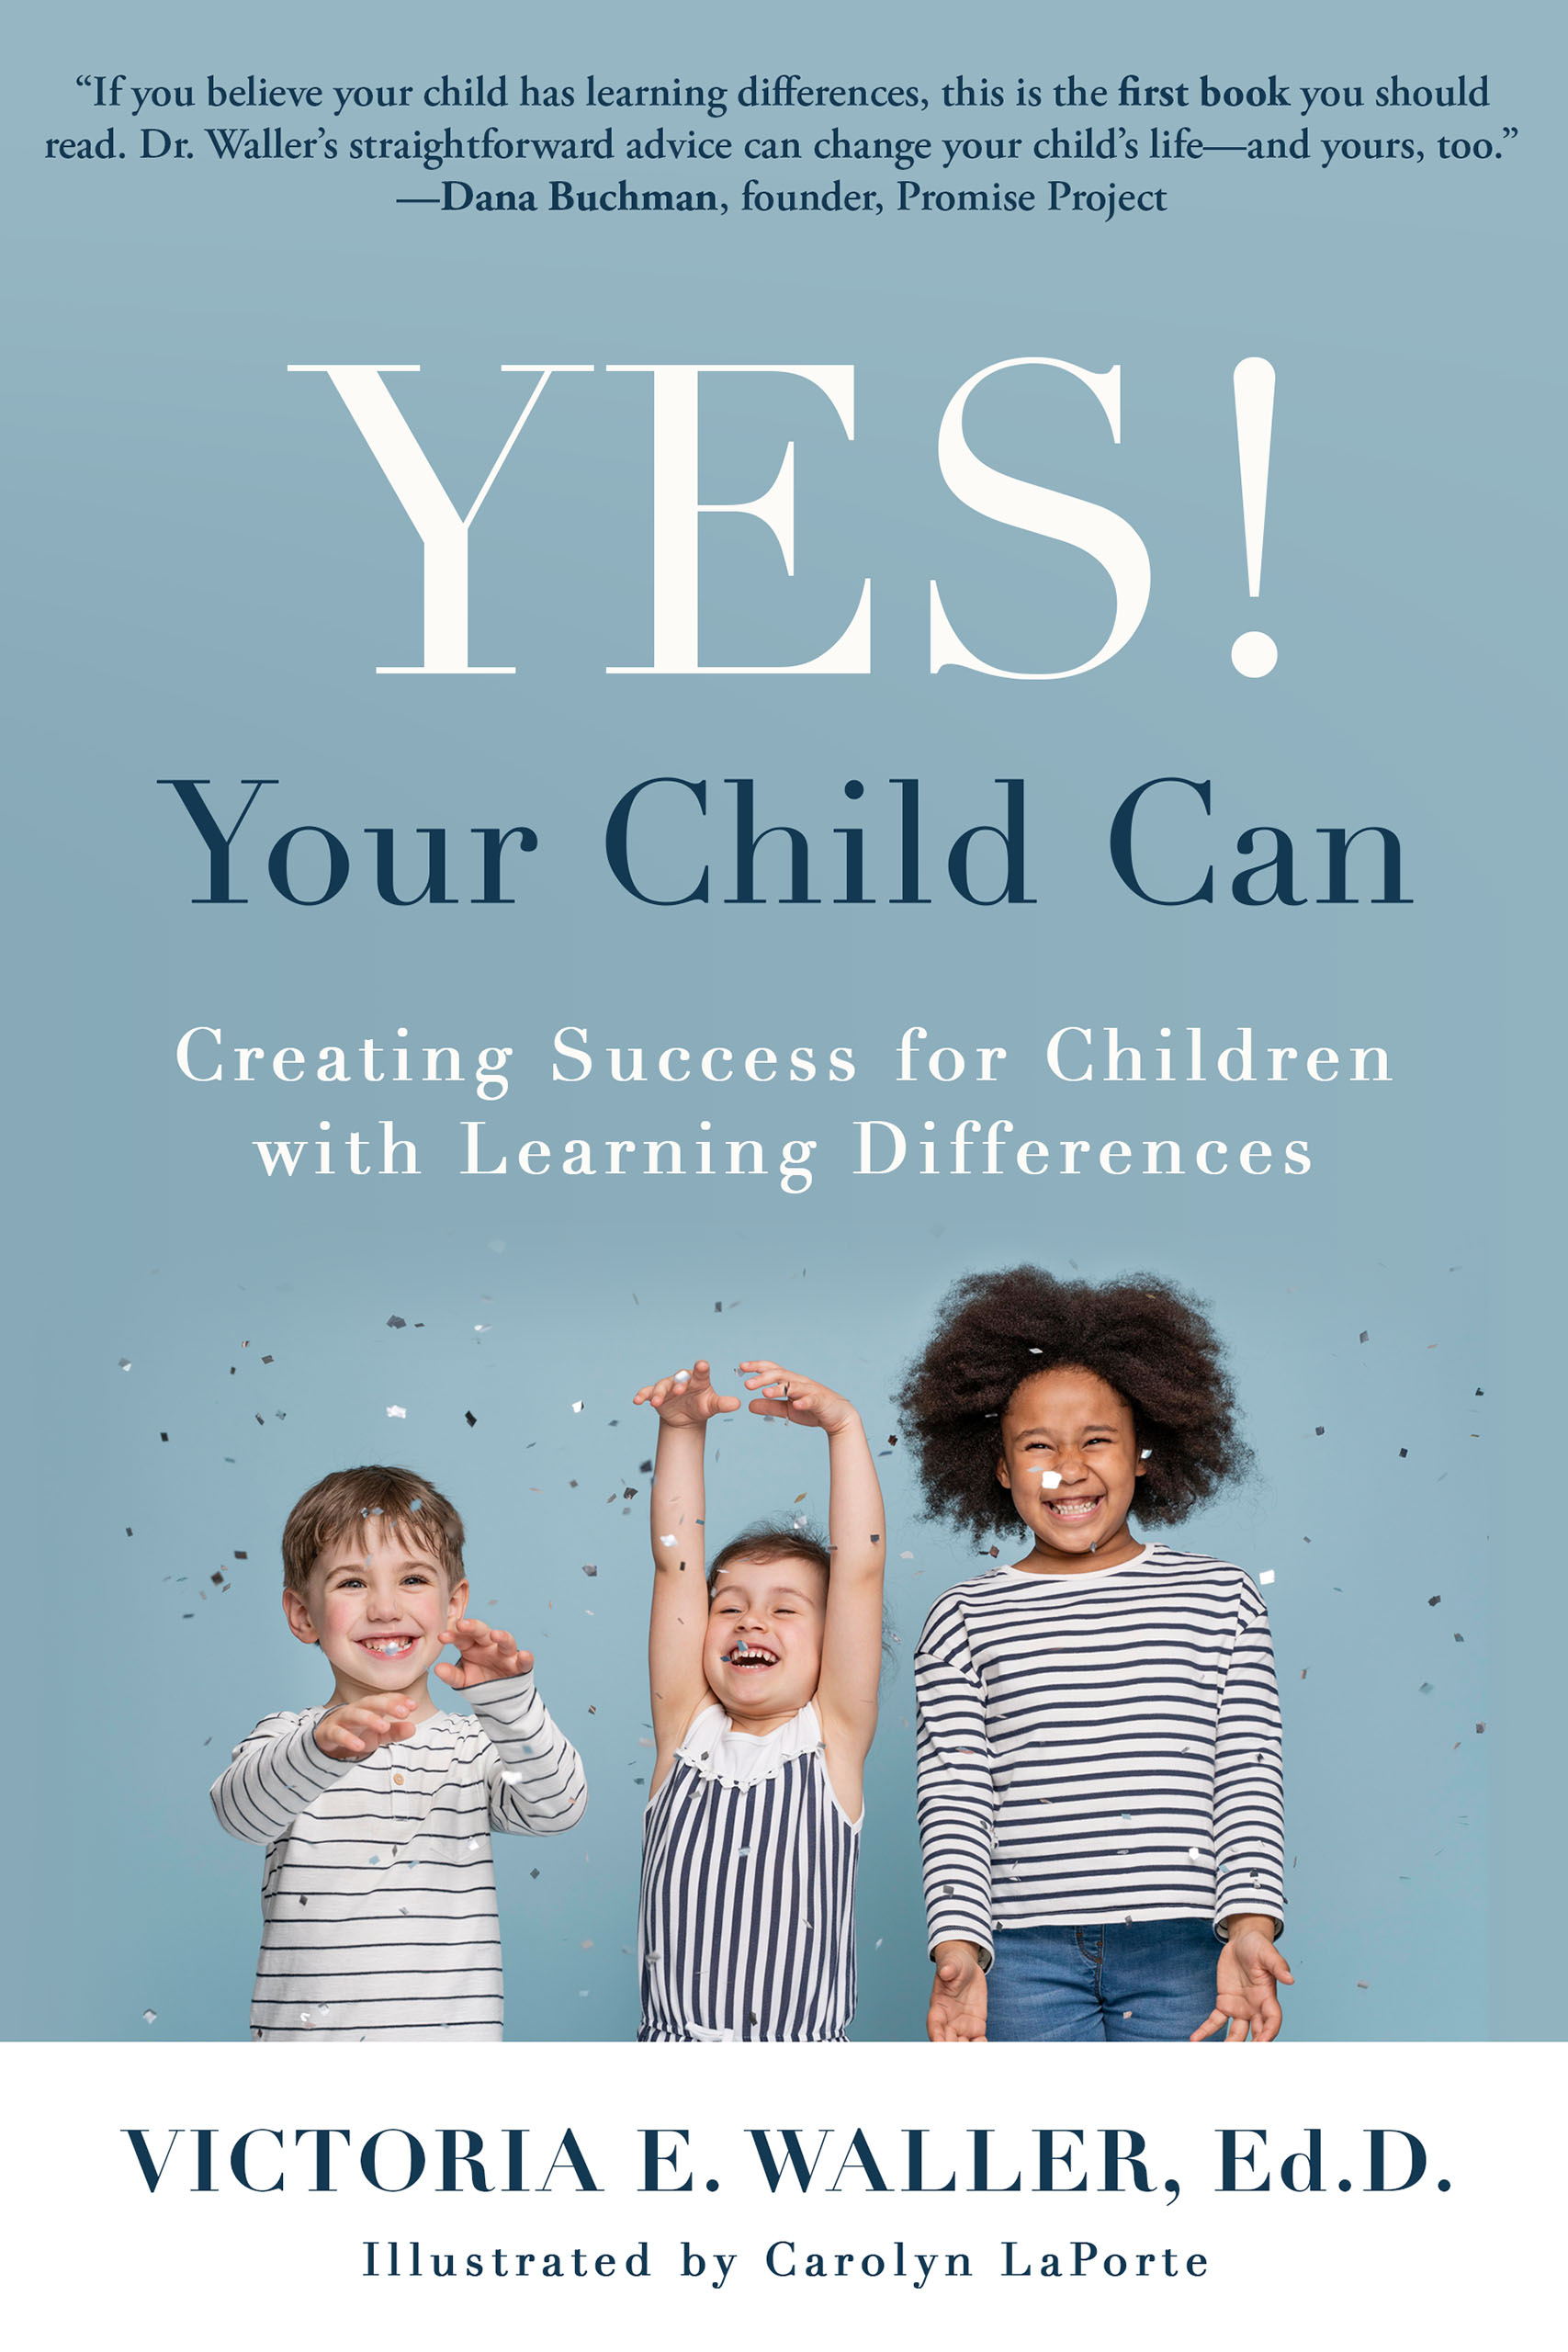 Yes! Your Child Can: Creating Success for Children with Learning Differences